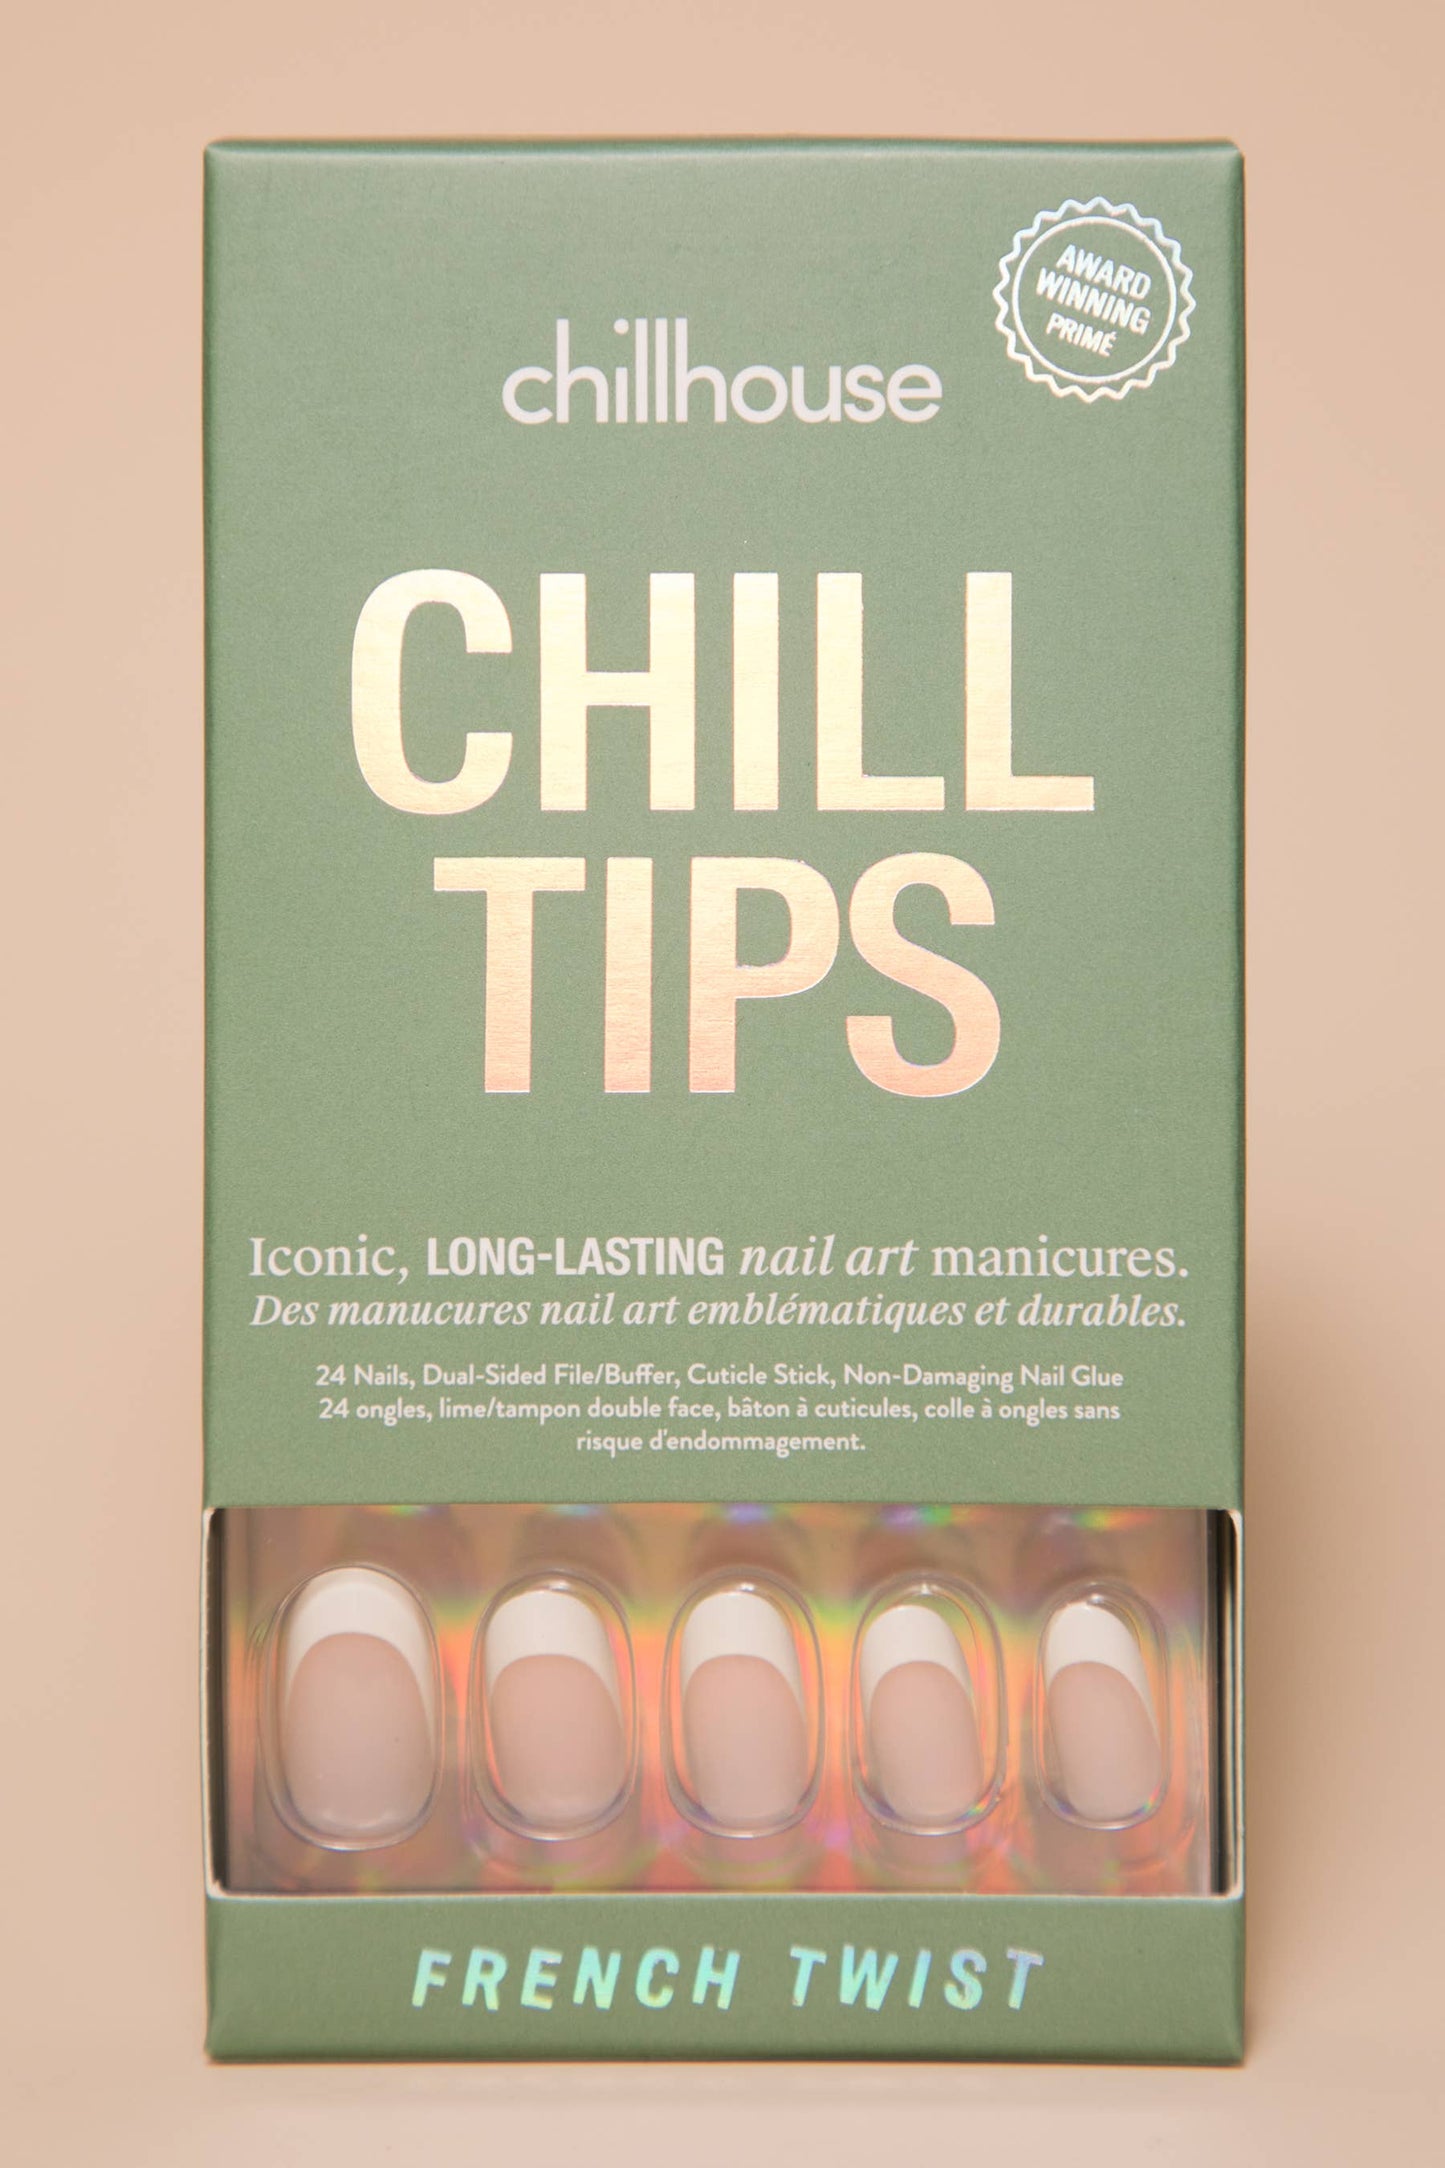 Chill Tips - French Twist by Chillhouse